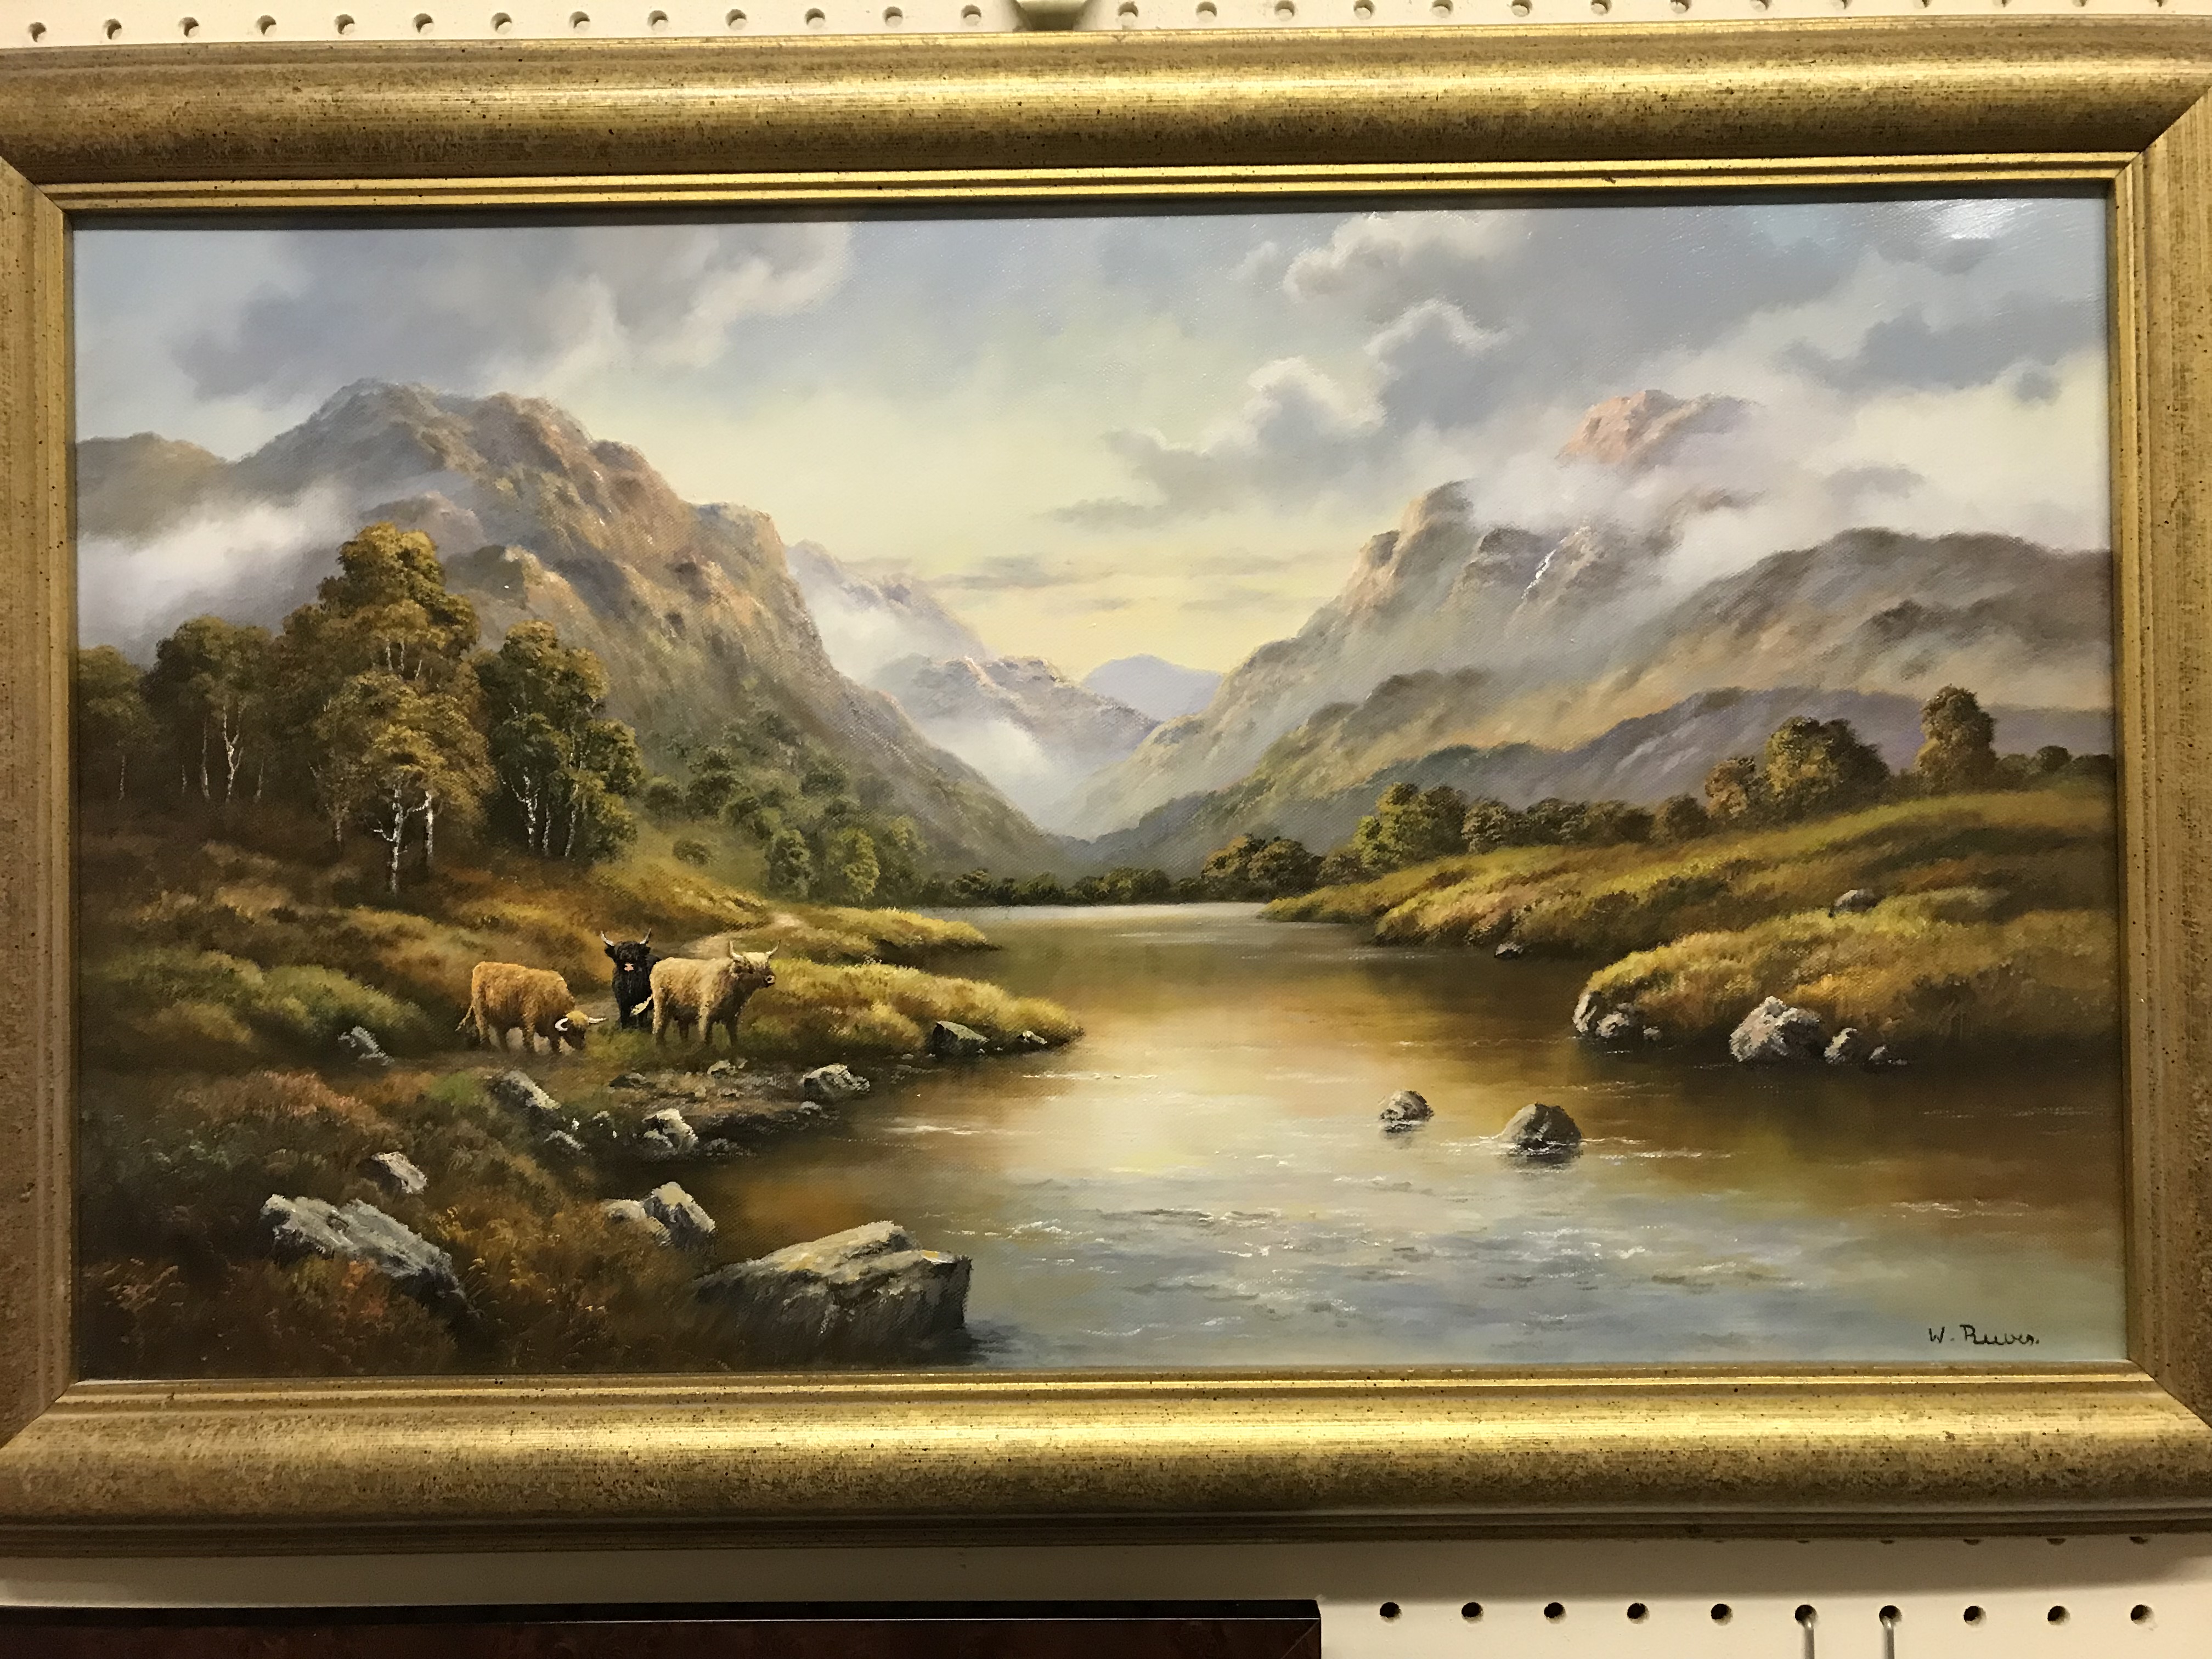 W. REEVES "Rural landscape with cows and river" oil on canvas, signed lower right, 36 cm x 61.